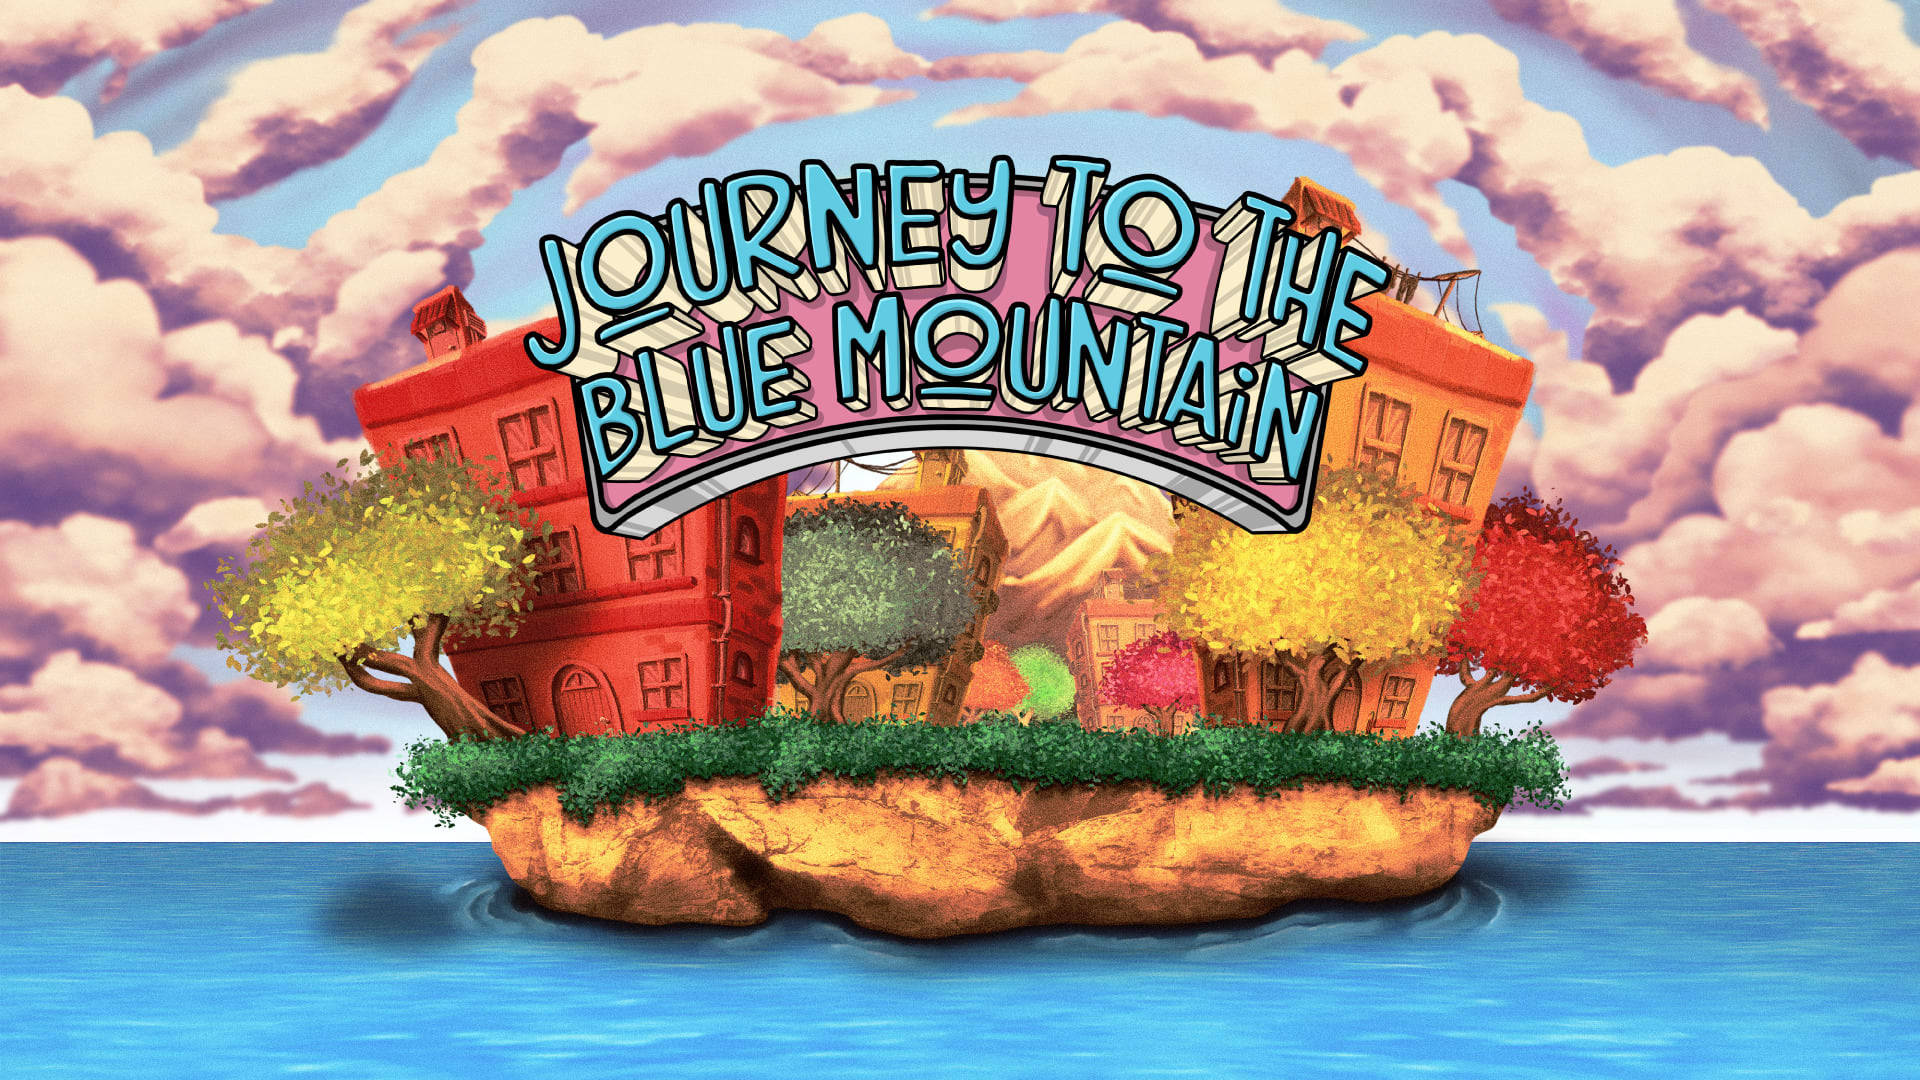 Journey To The Blue Mountain